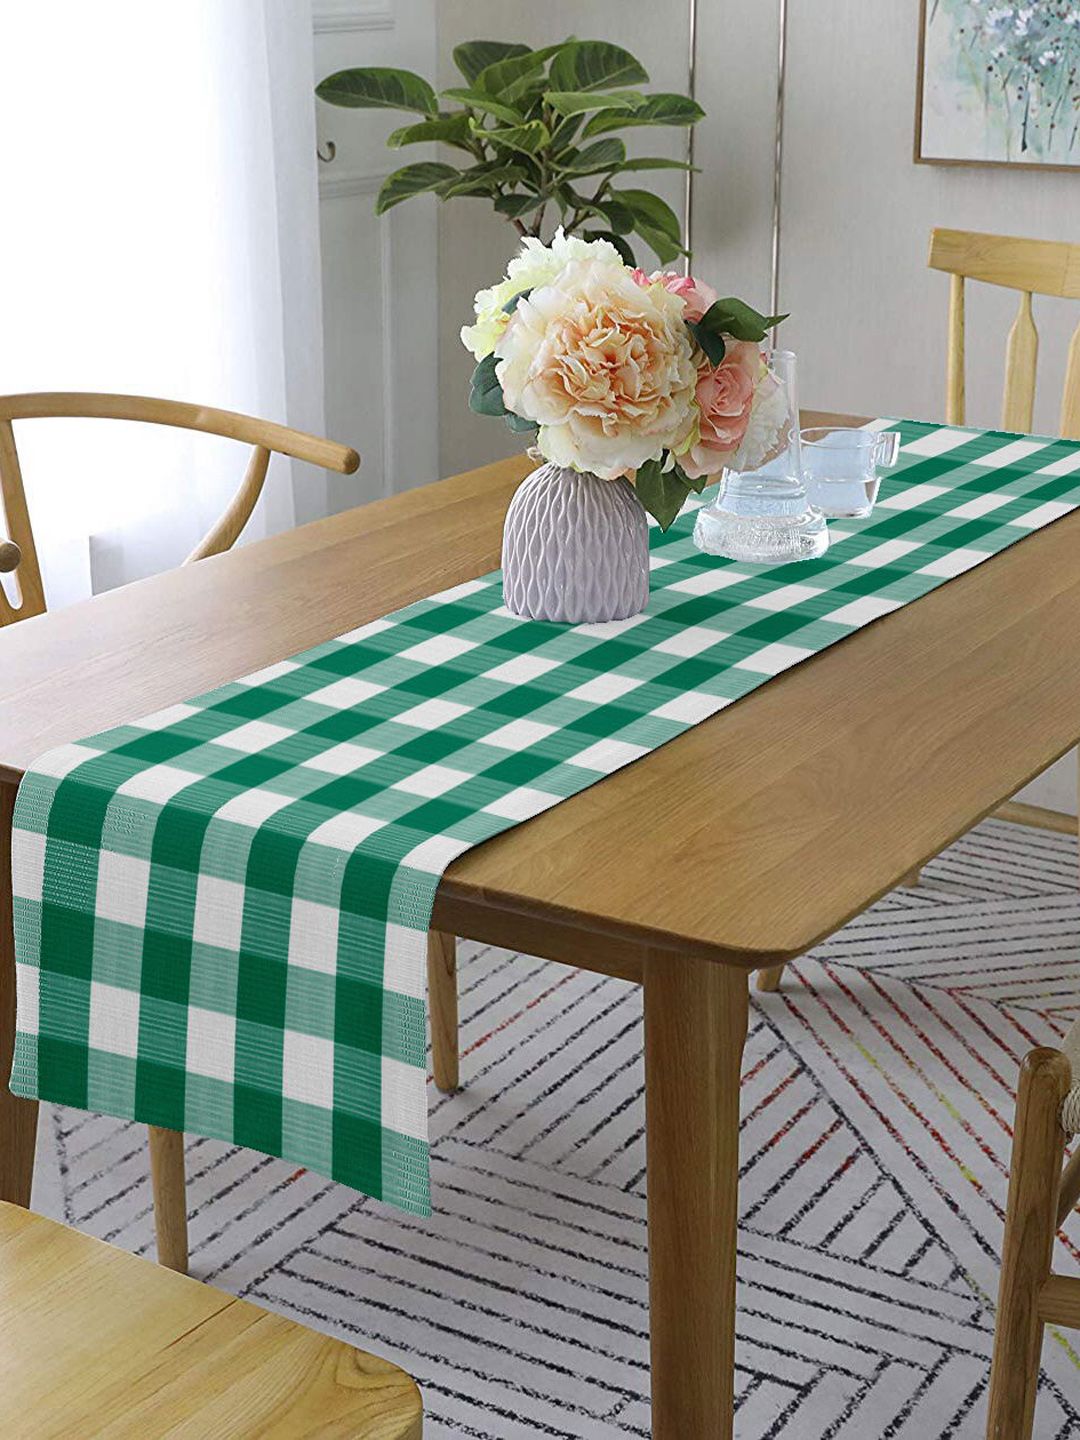 Lushomes Green & White Checked Table Runner Price in India